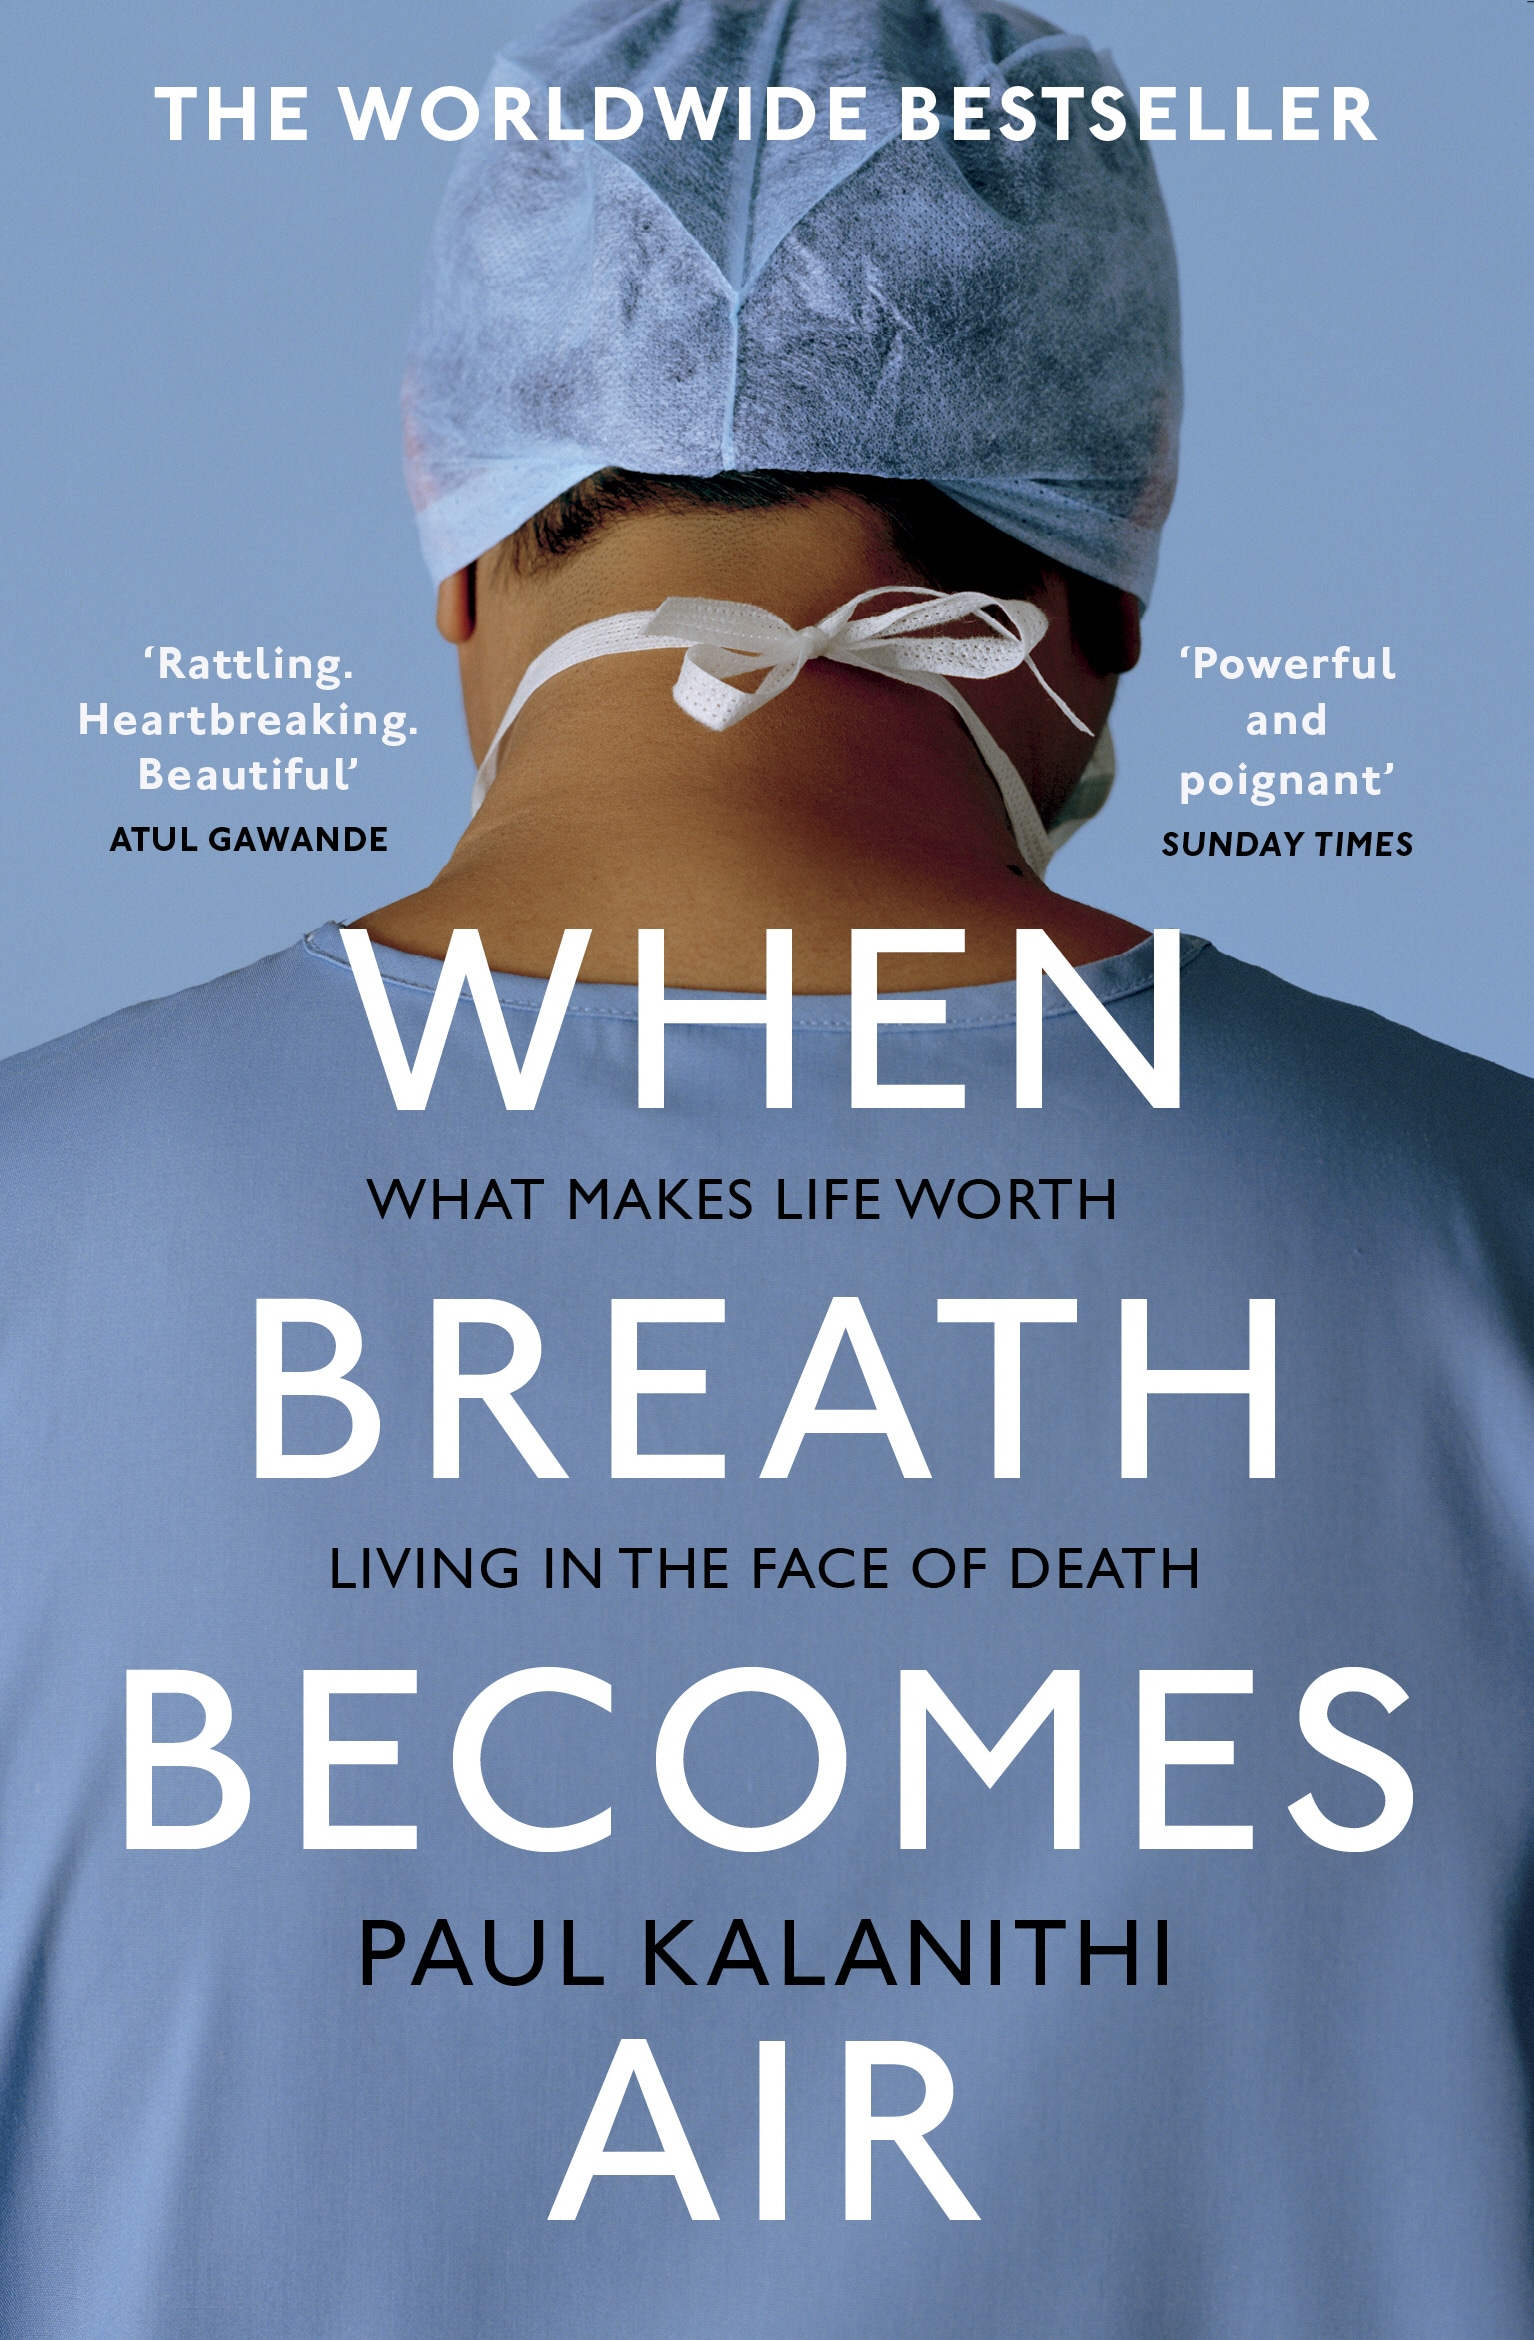 Book “When Breath Becomes Air” by Paul Kalanithi — January 5, 2017